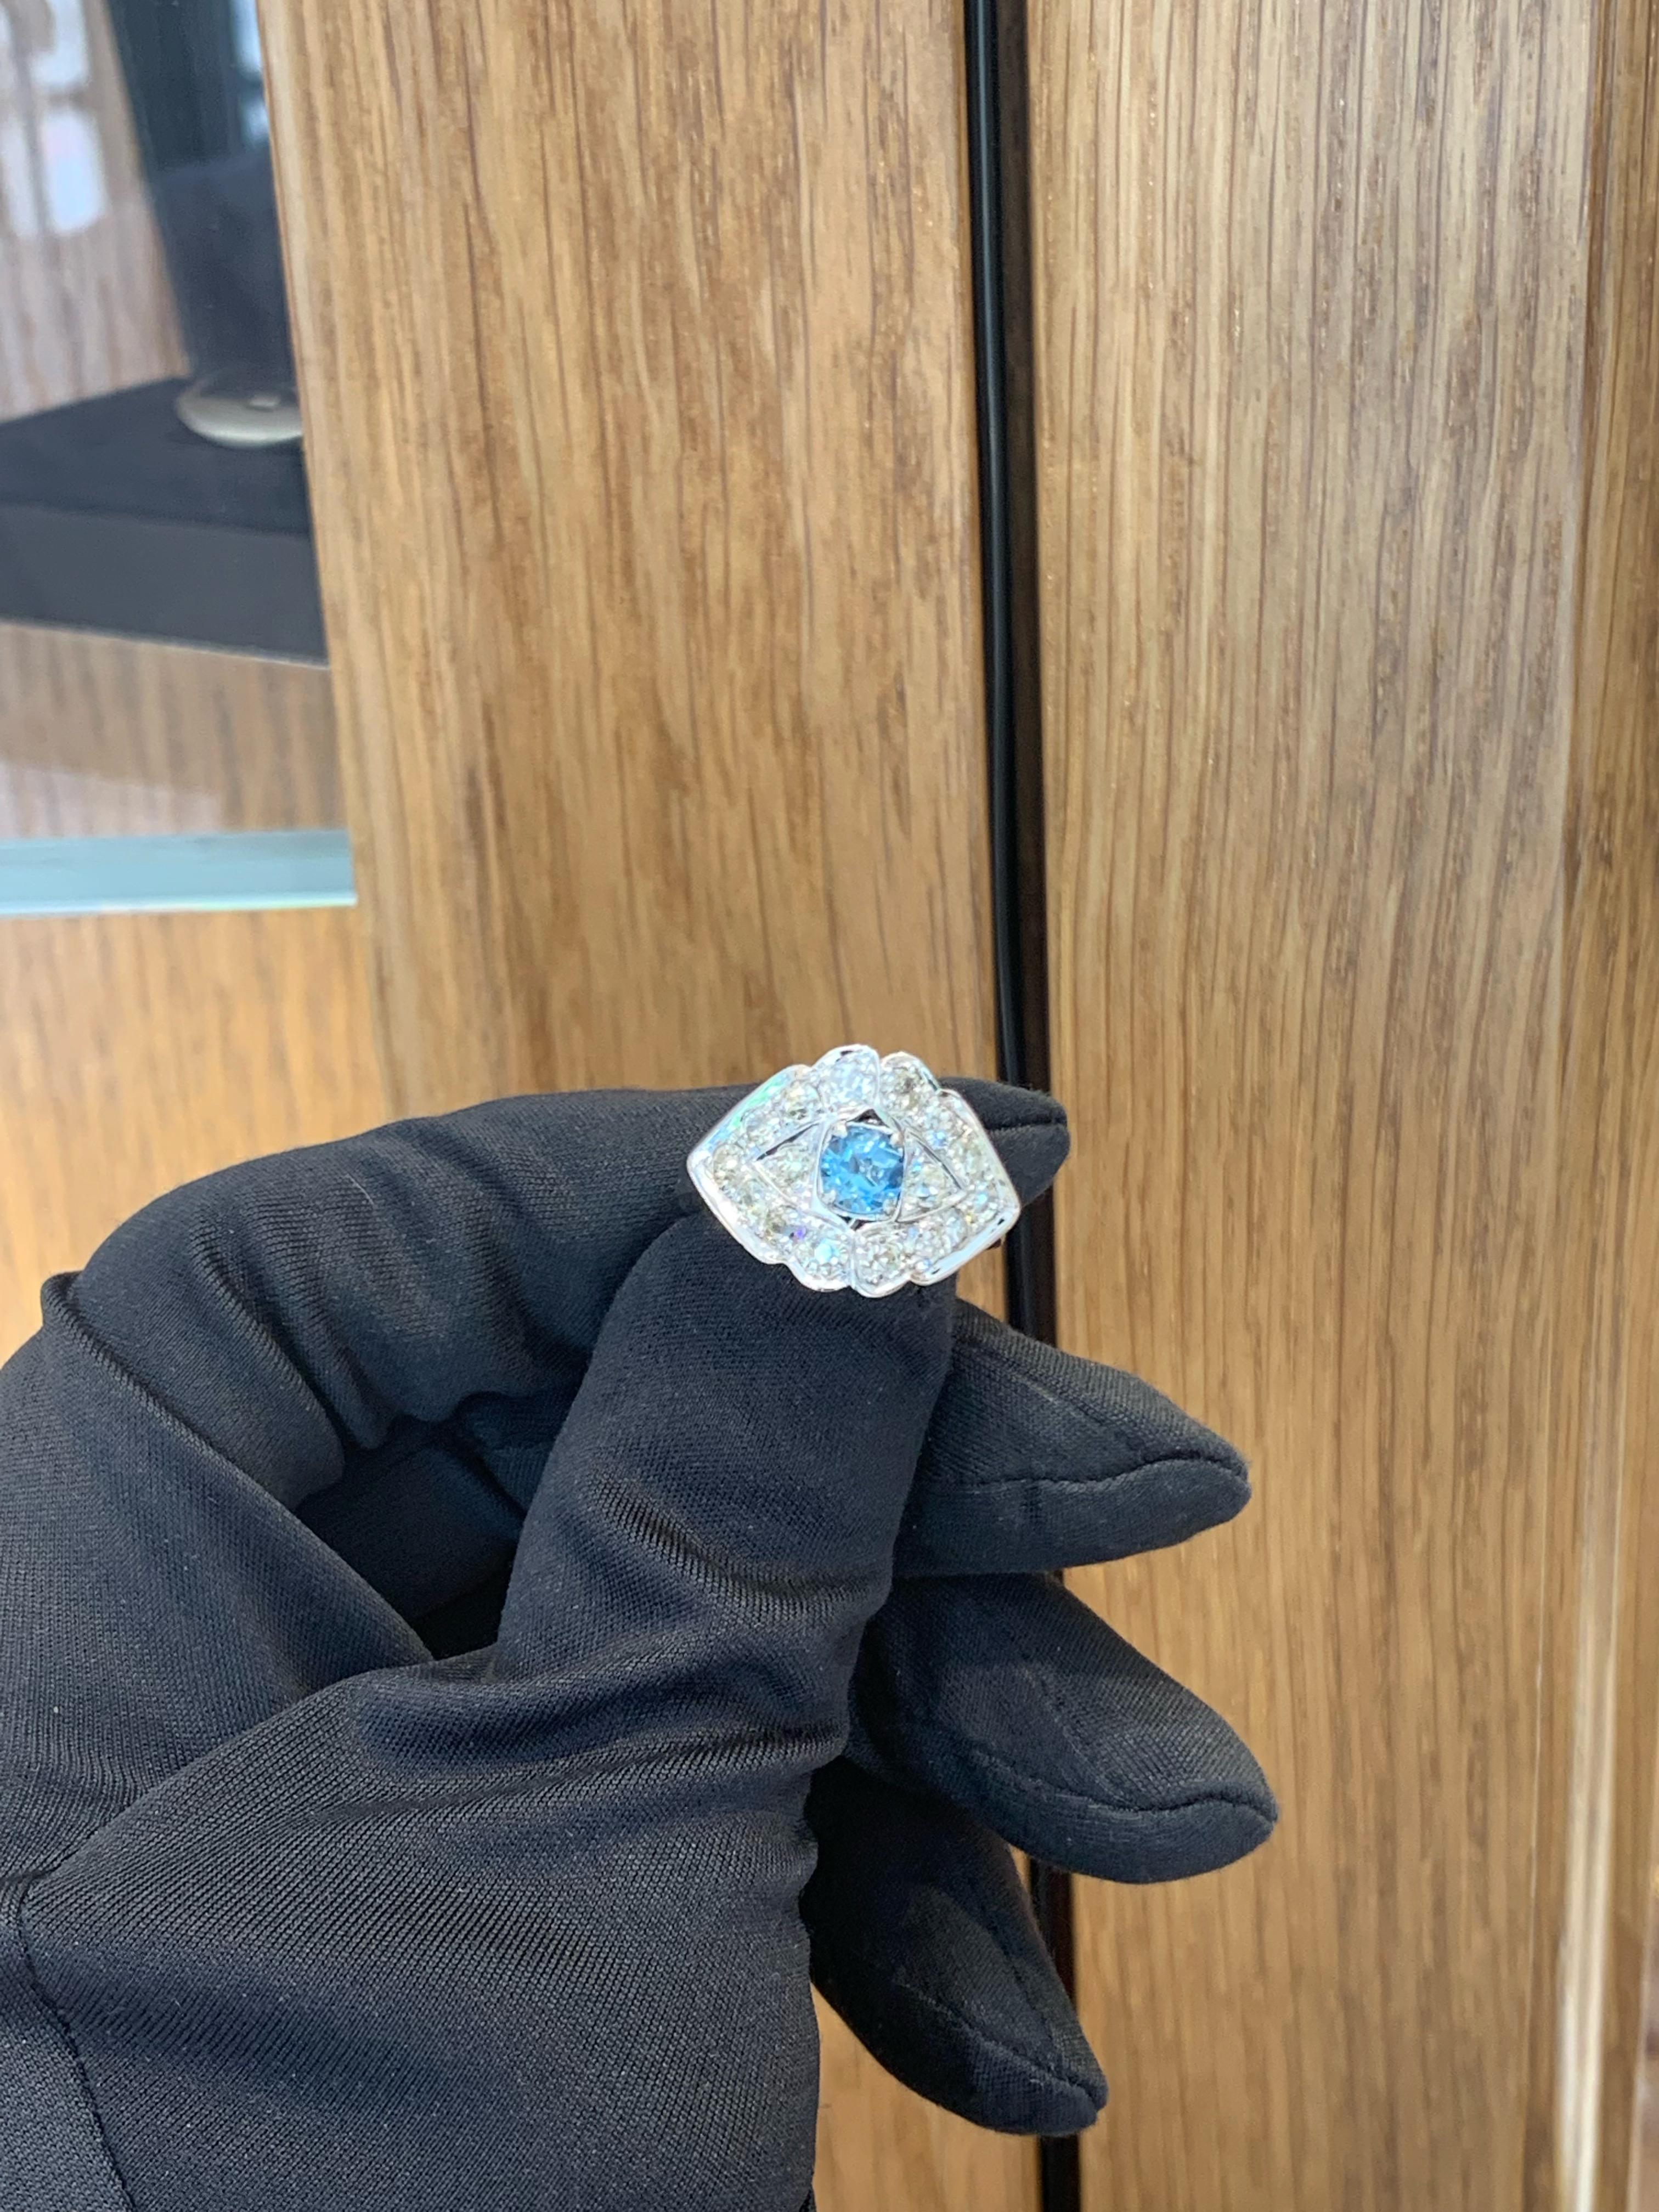 Beautiful Blue Aquamarine & Diamond Ring Set In 14k White Gold.
Amazing Shine, Incredible Craftsmanship.
Great Statement Piece.
Very Well Crafted.
Approximately 0.75 Carats Aquamarine.
Approximately 3.0 Carats Of Diamonds.
Nice & Clean Goods.
Large